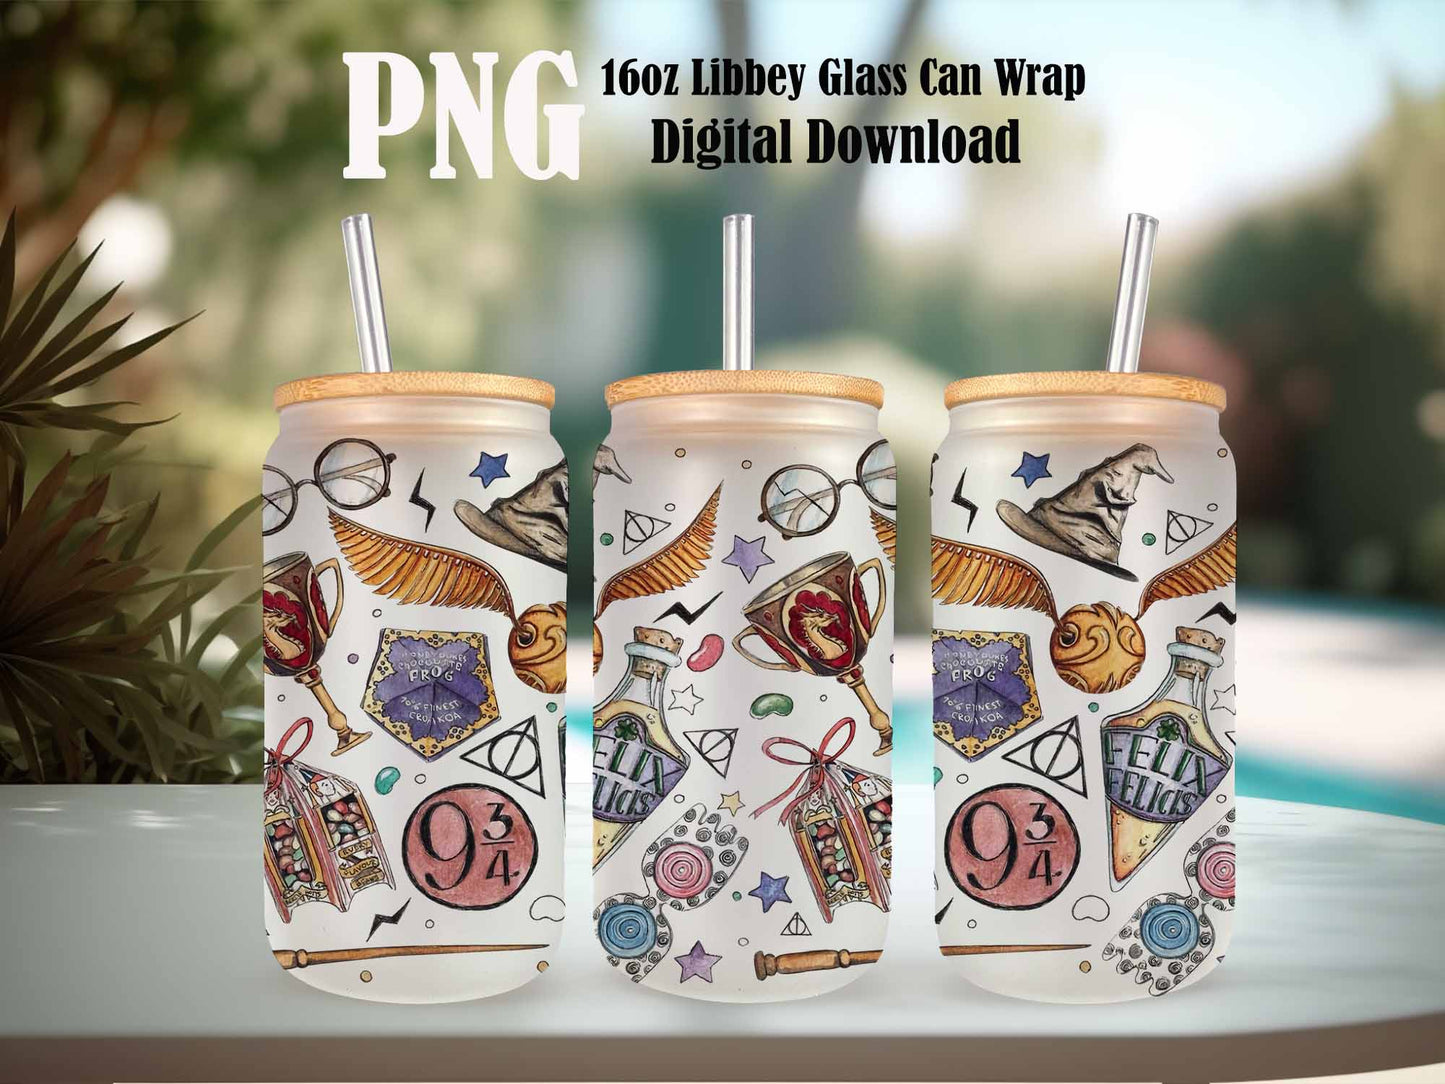 Harry Potter Libbey Glass PNG, 16oz Can Glass PNG, Hogwarts Alumni, Magic Wand Symbol, Wizardy Houses